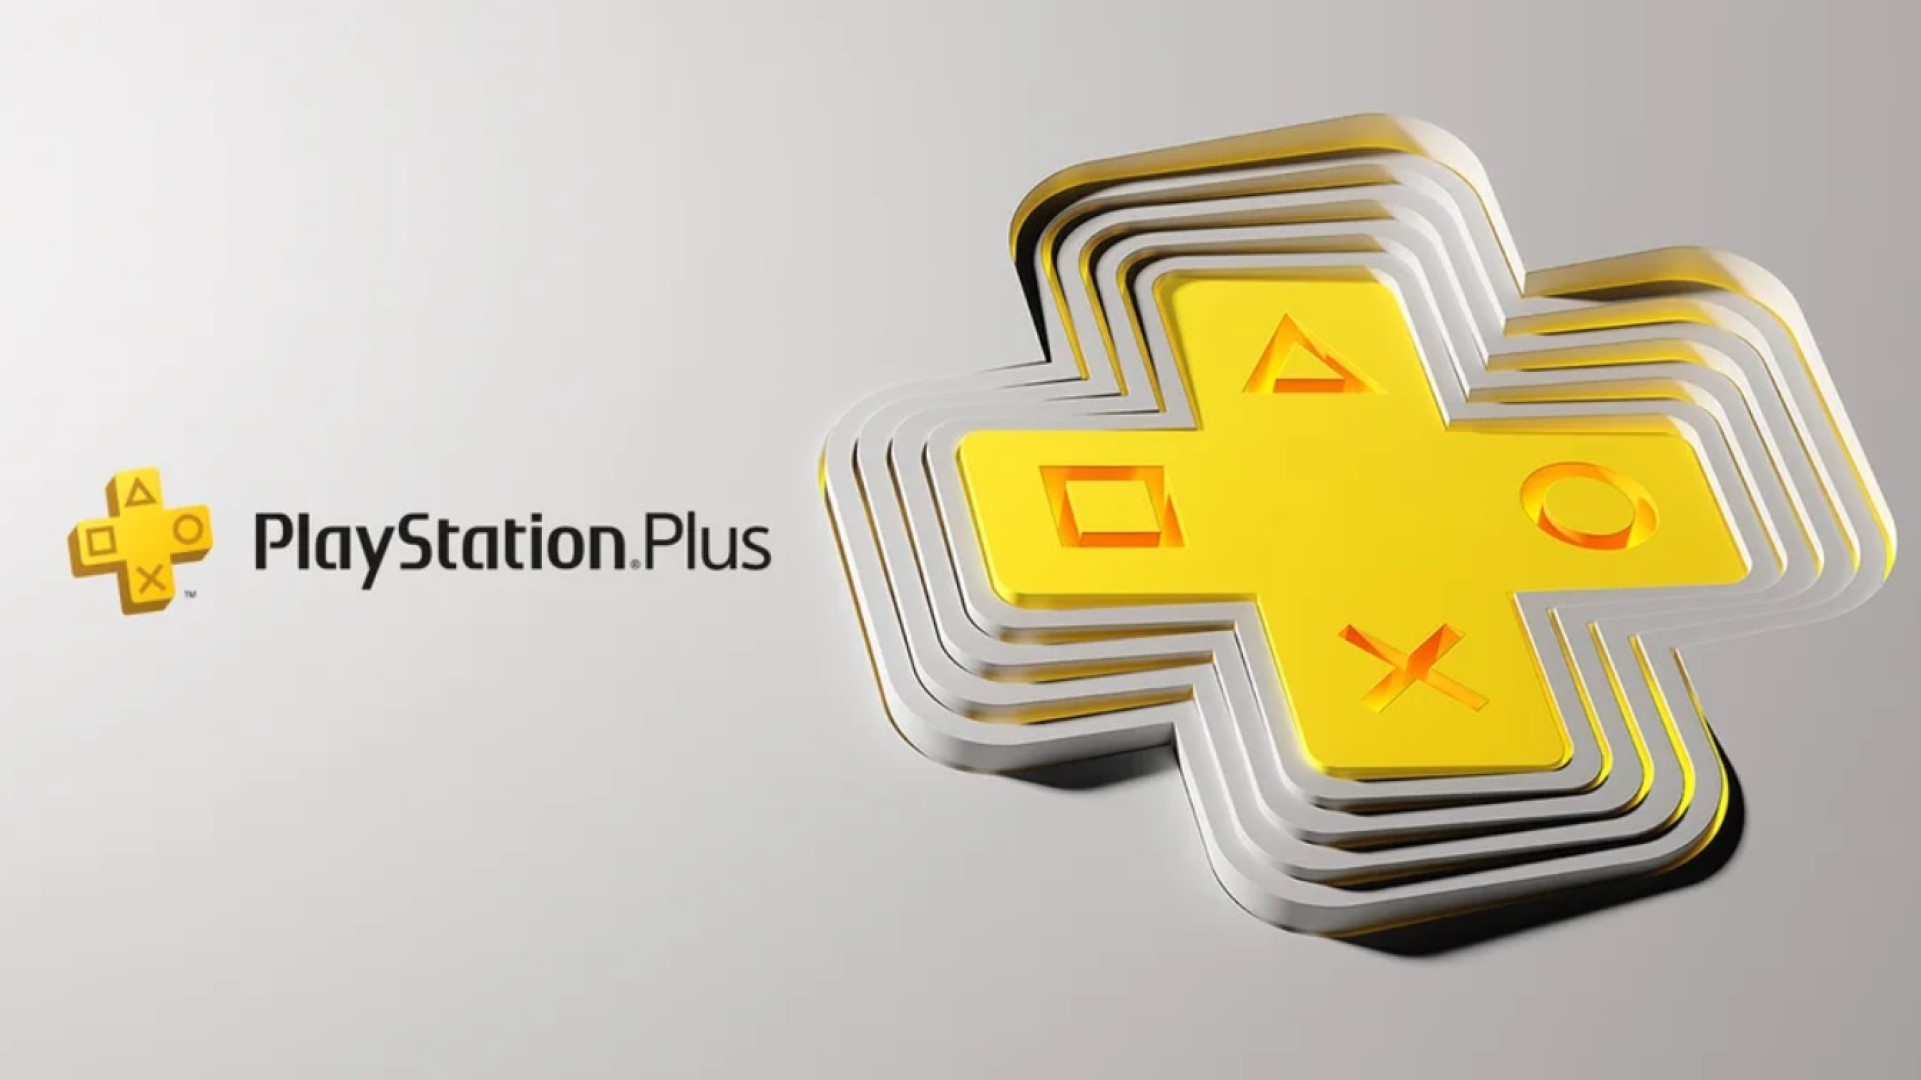 Super Stardust Portable first PS Plus classic to add trophies